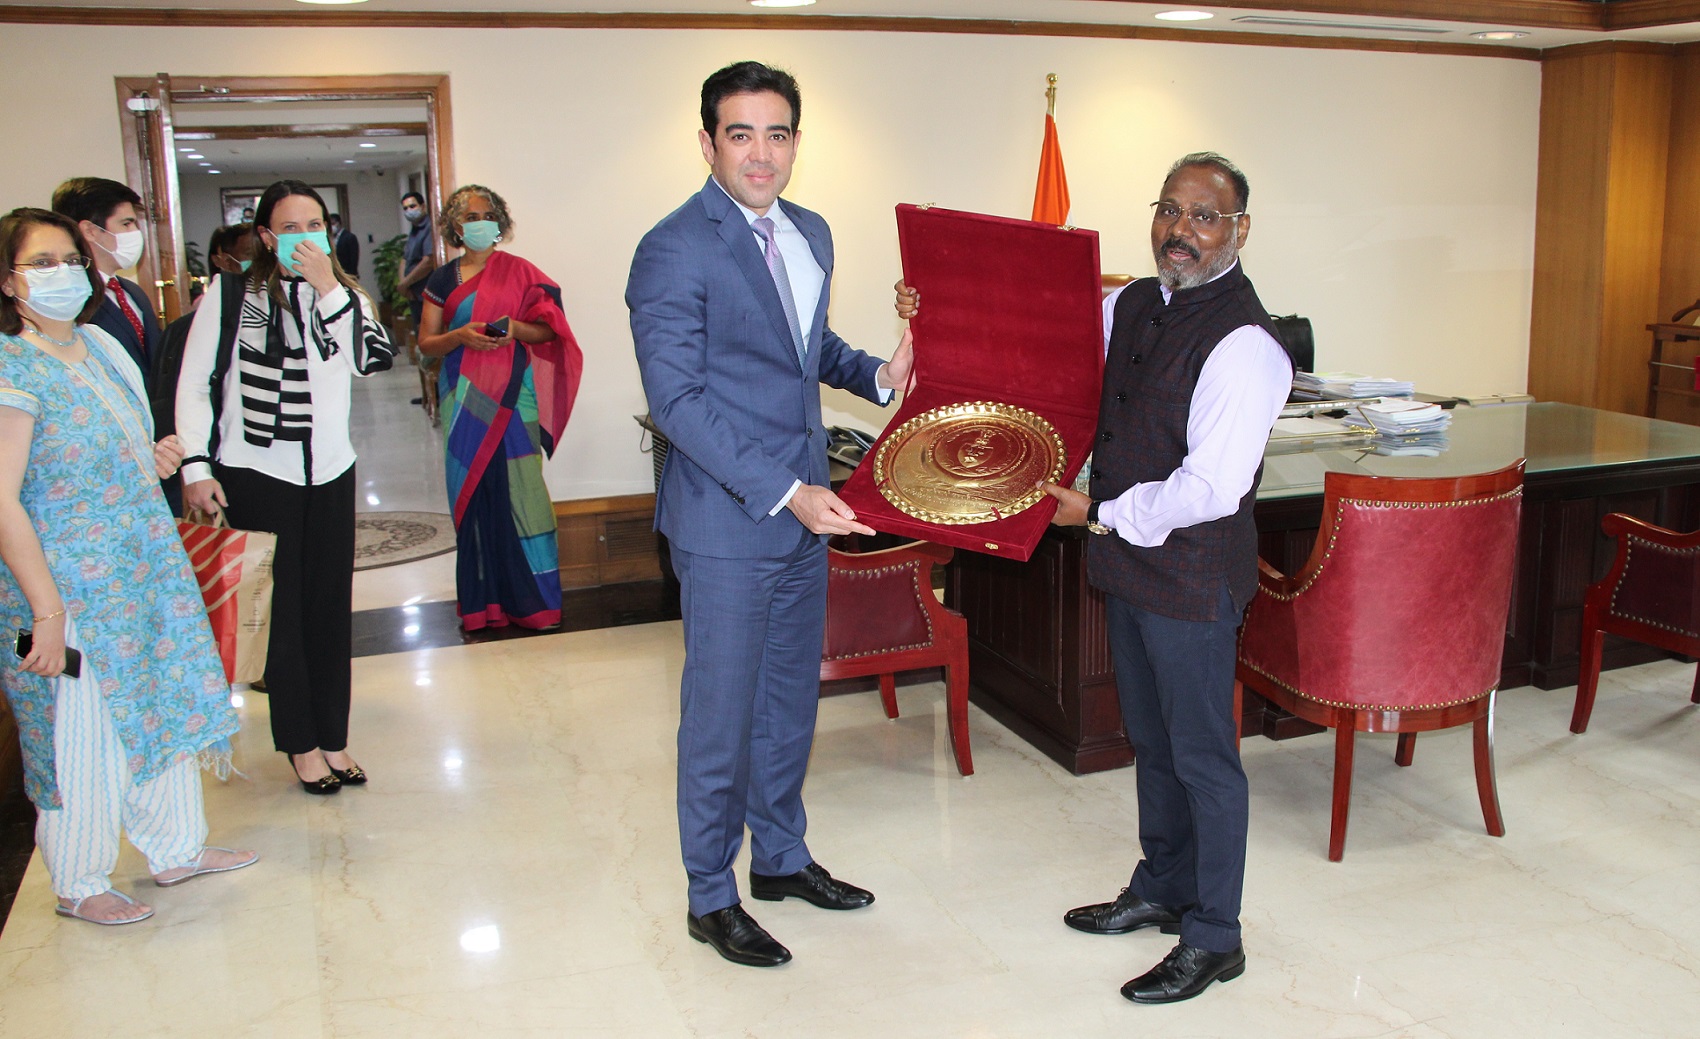 Shri. Girish Chandra Murmu, CAG of India met Minister Bruno Dantas, Vice-President, Federal Court of Audit Brazil during his visit to the Office of the CAG of India.